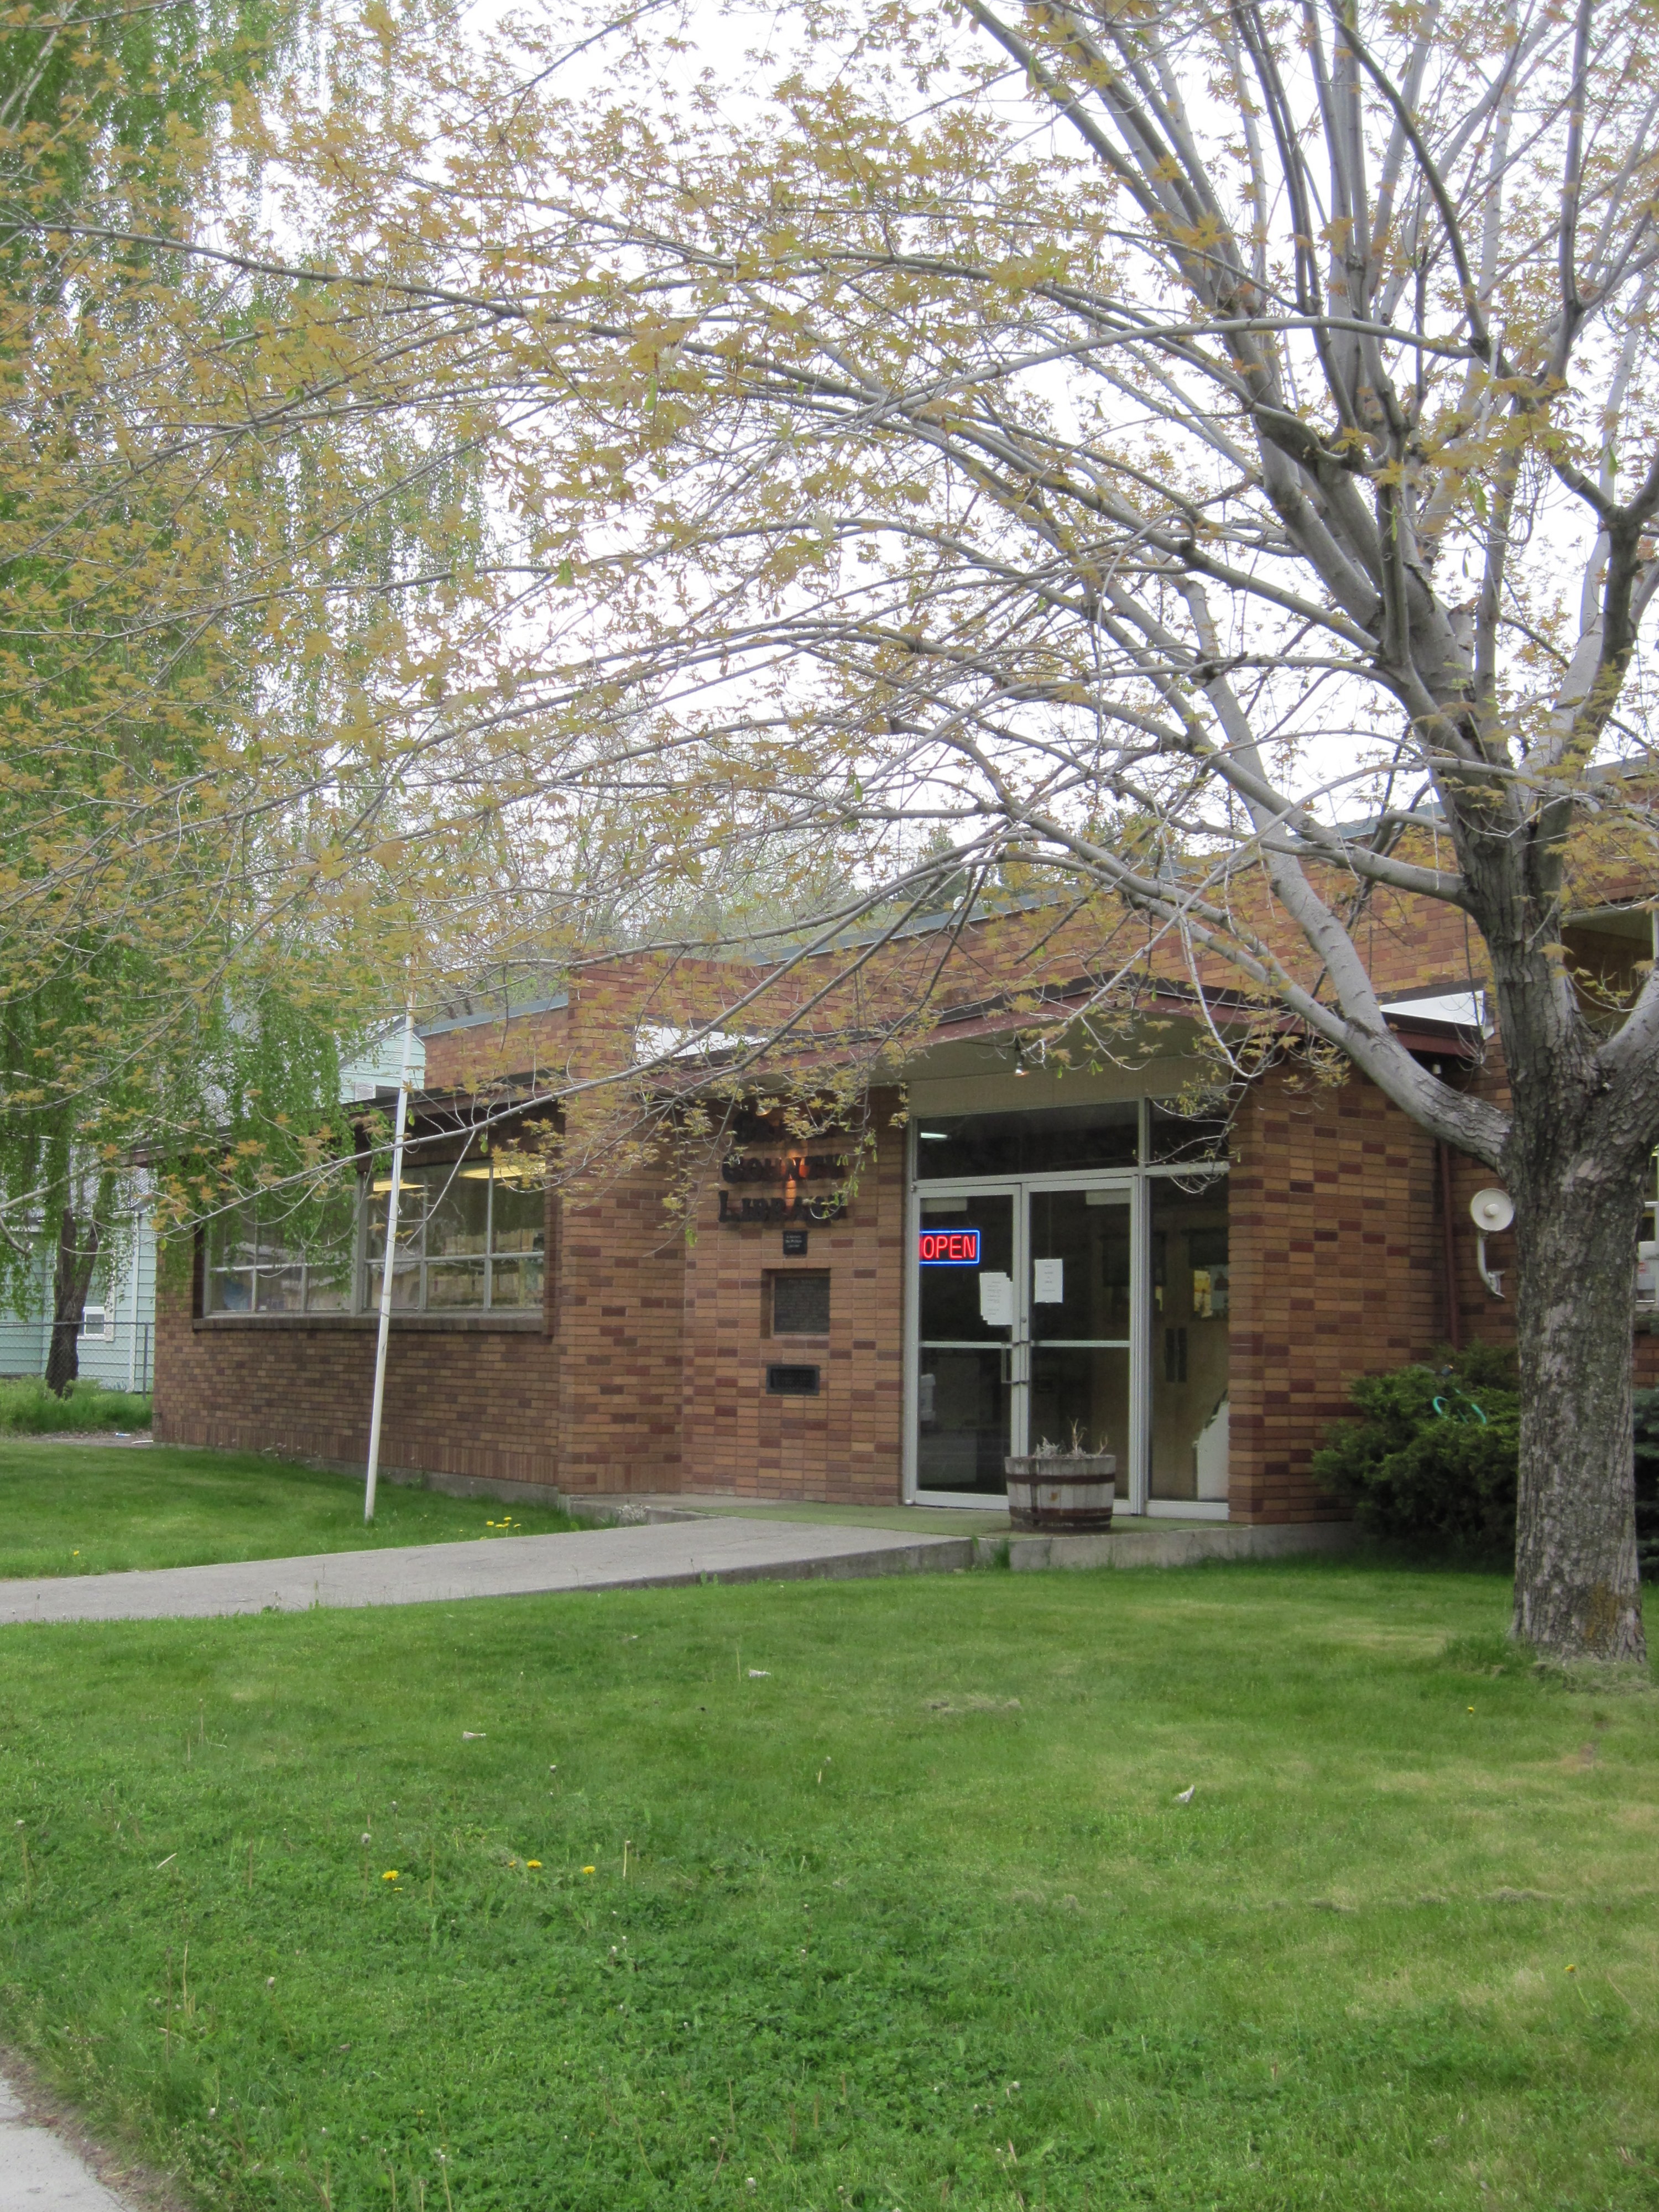 Grant County Library Picture